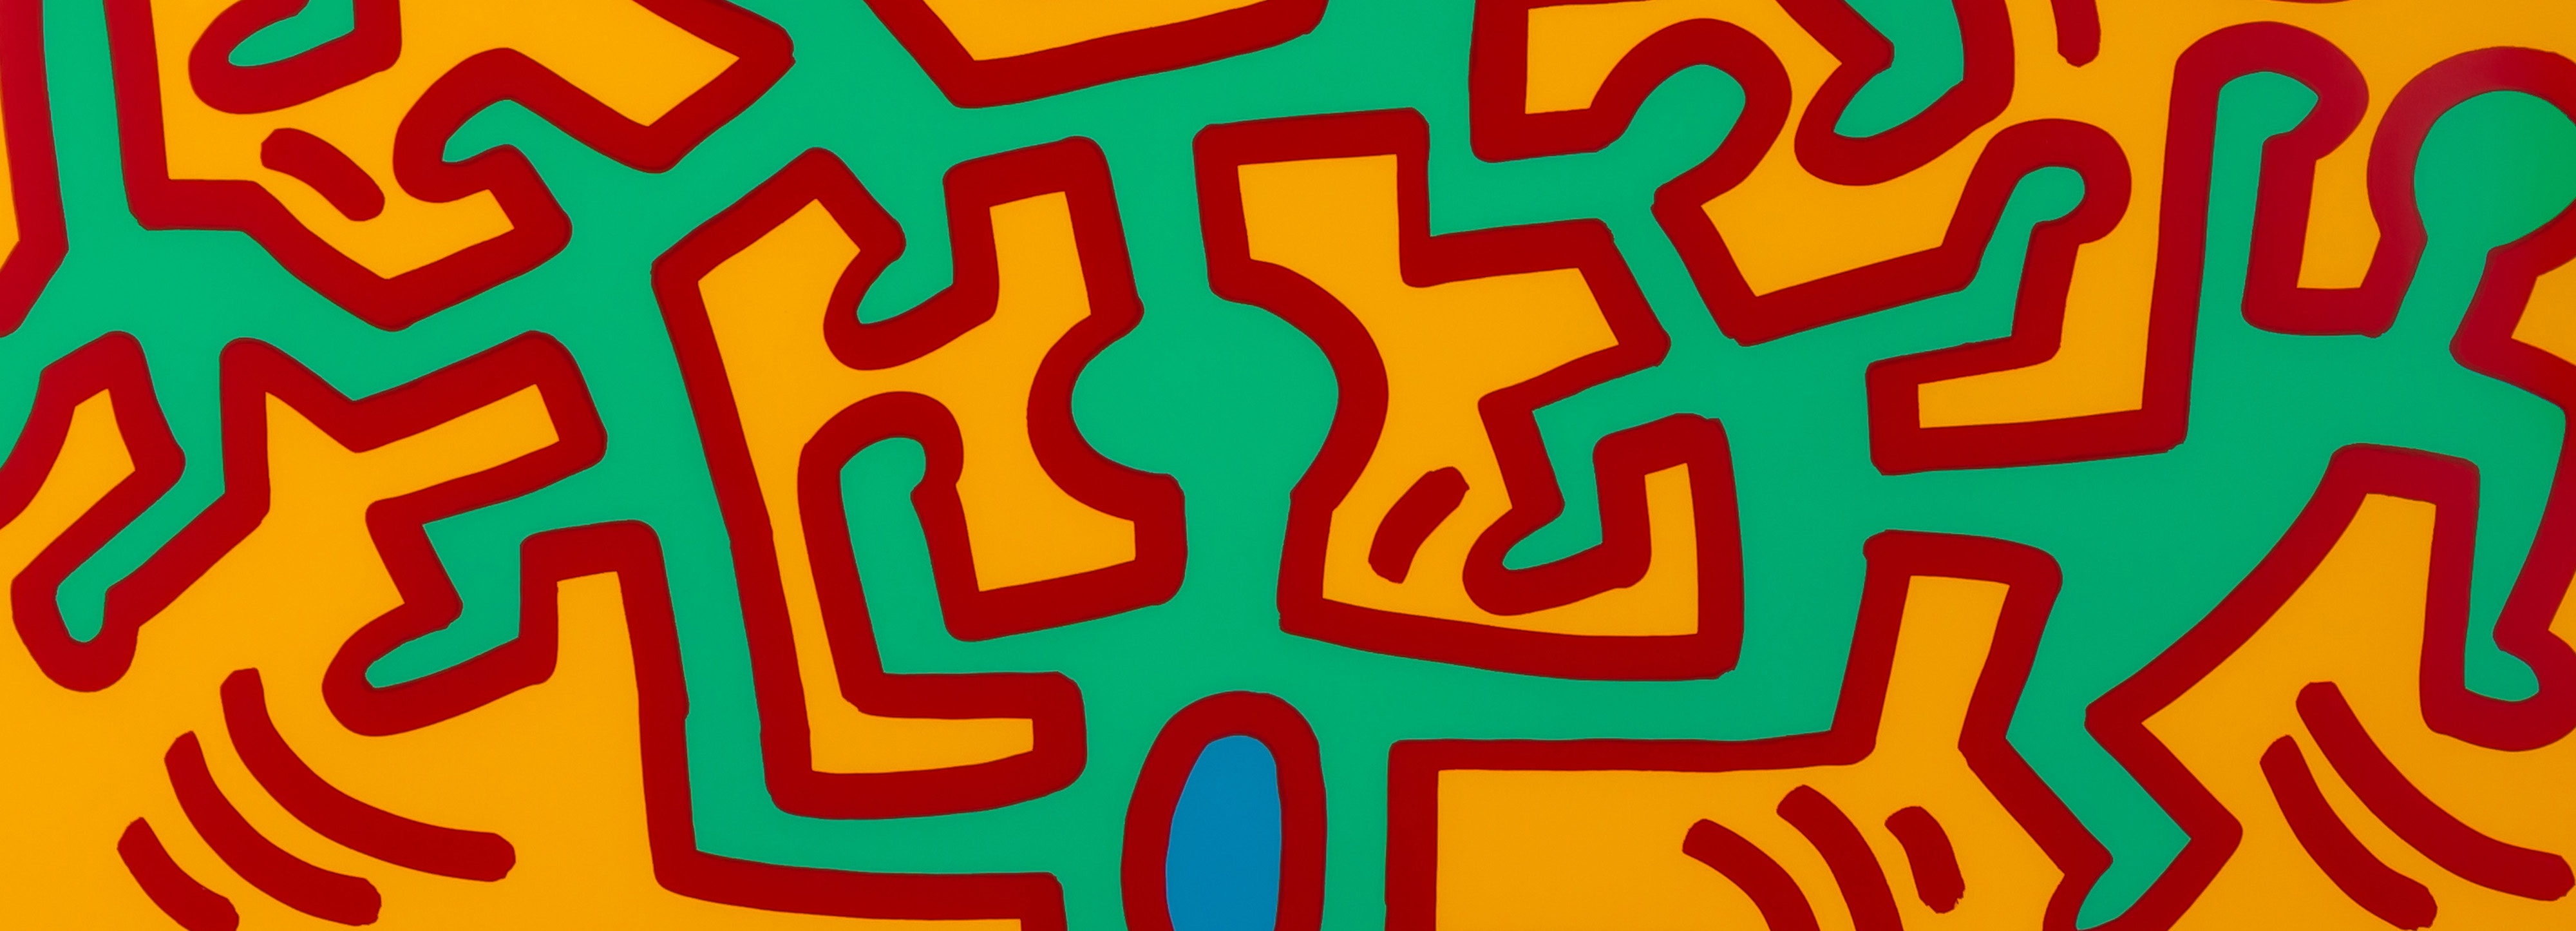 Keith Haring, Growing (Plate 2)